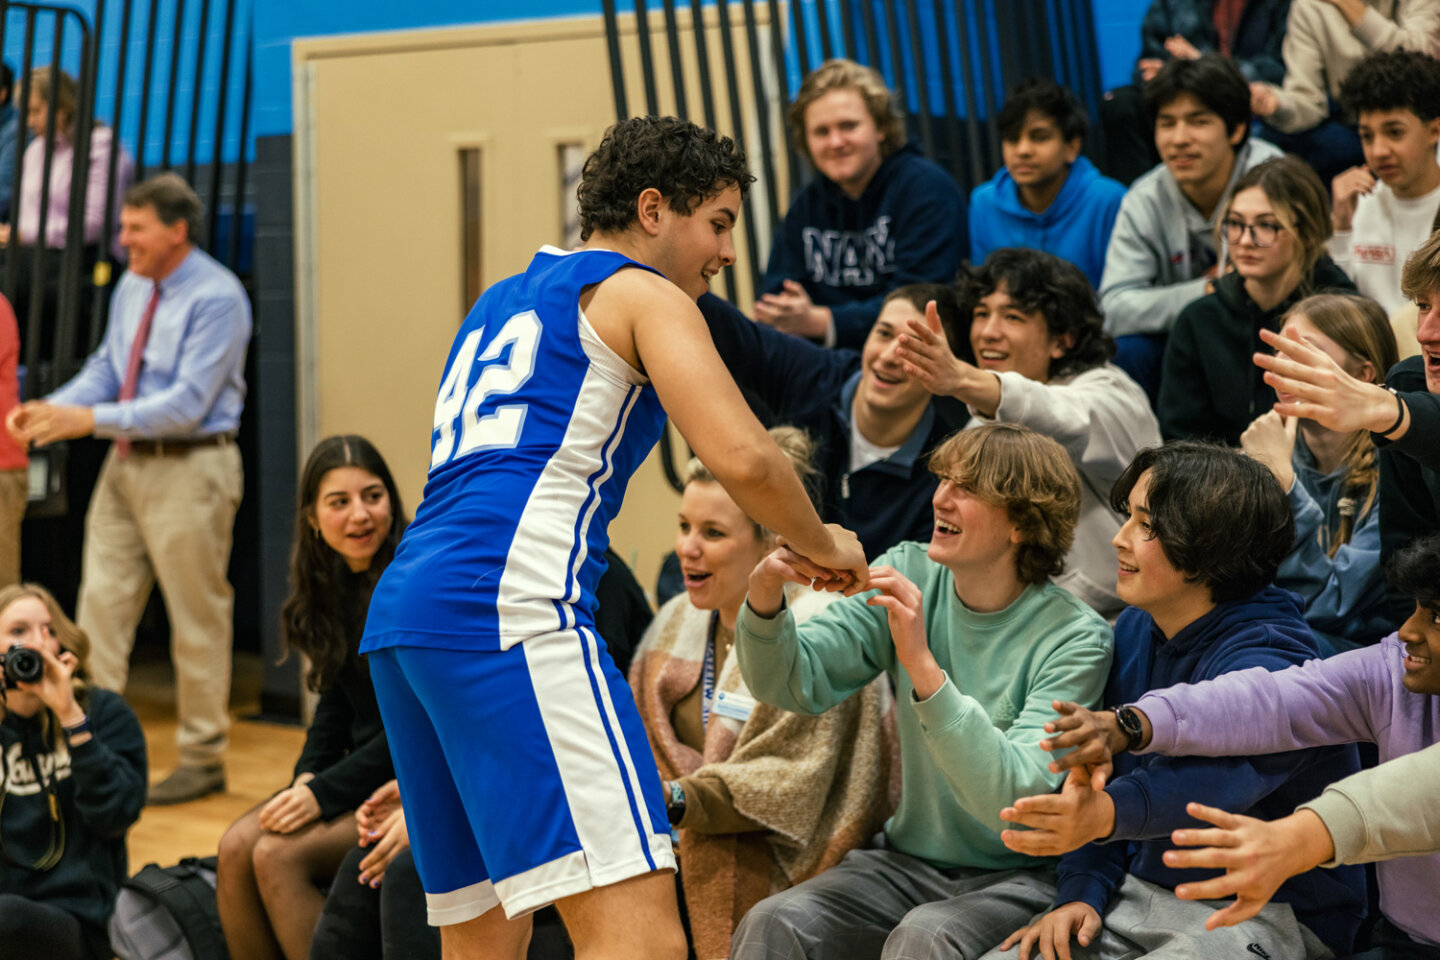 Boys basketball player greets spectators in the stands